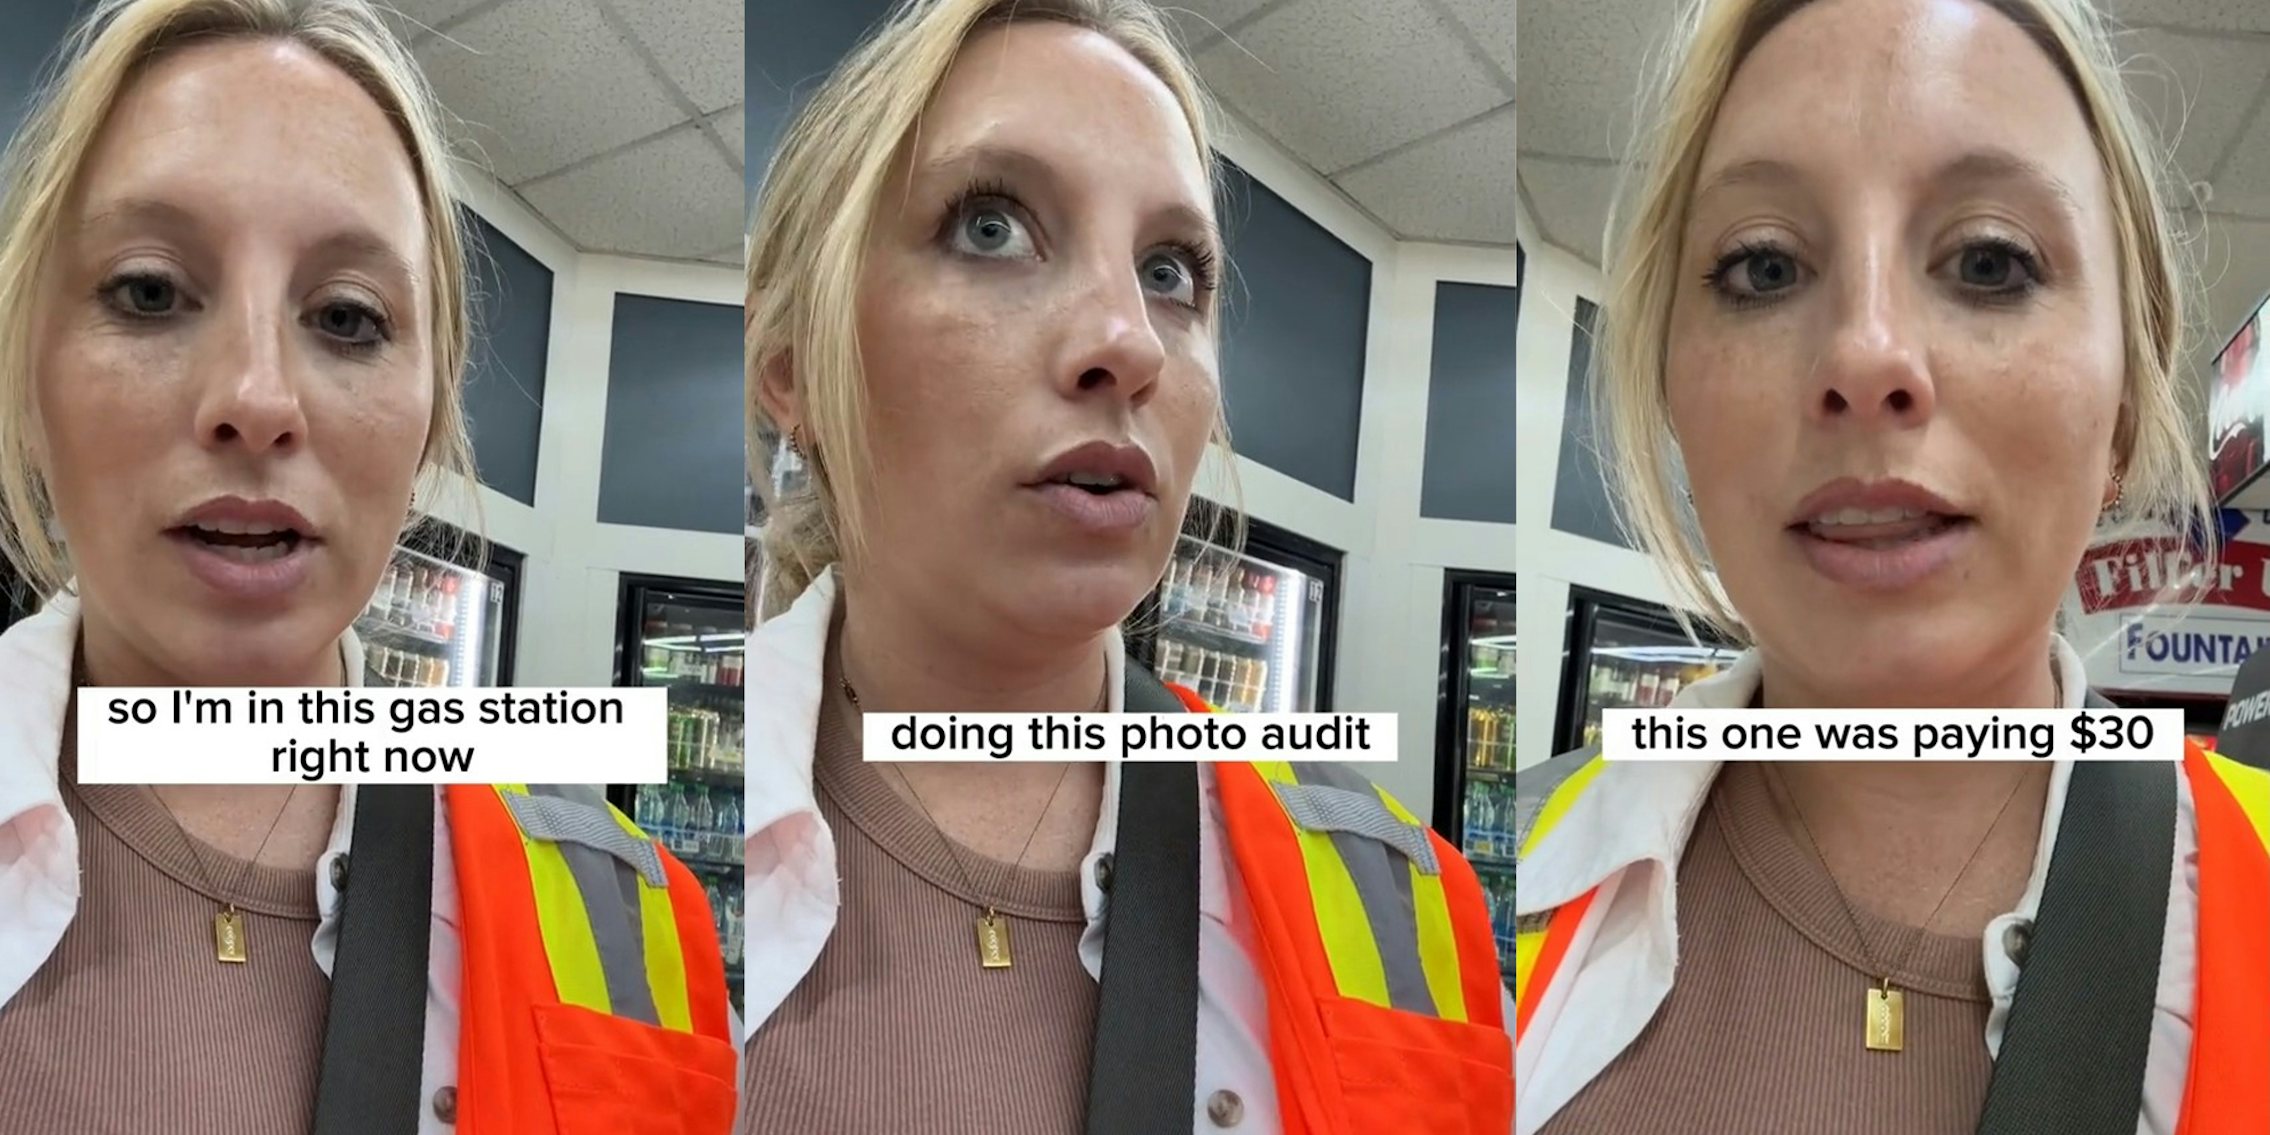 Woman explaining she is doing a photo audit at a gas station